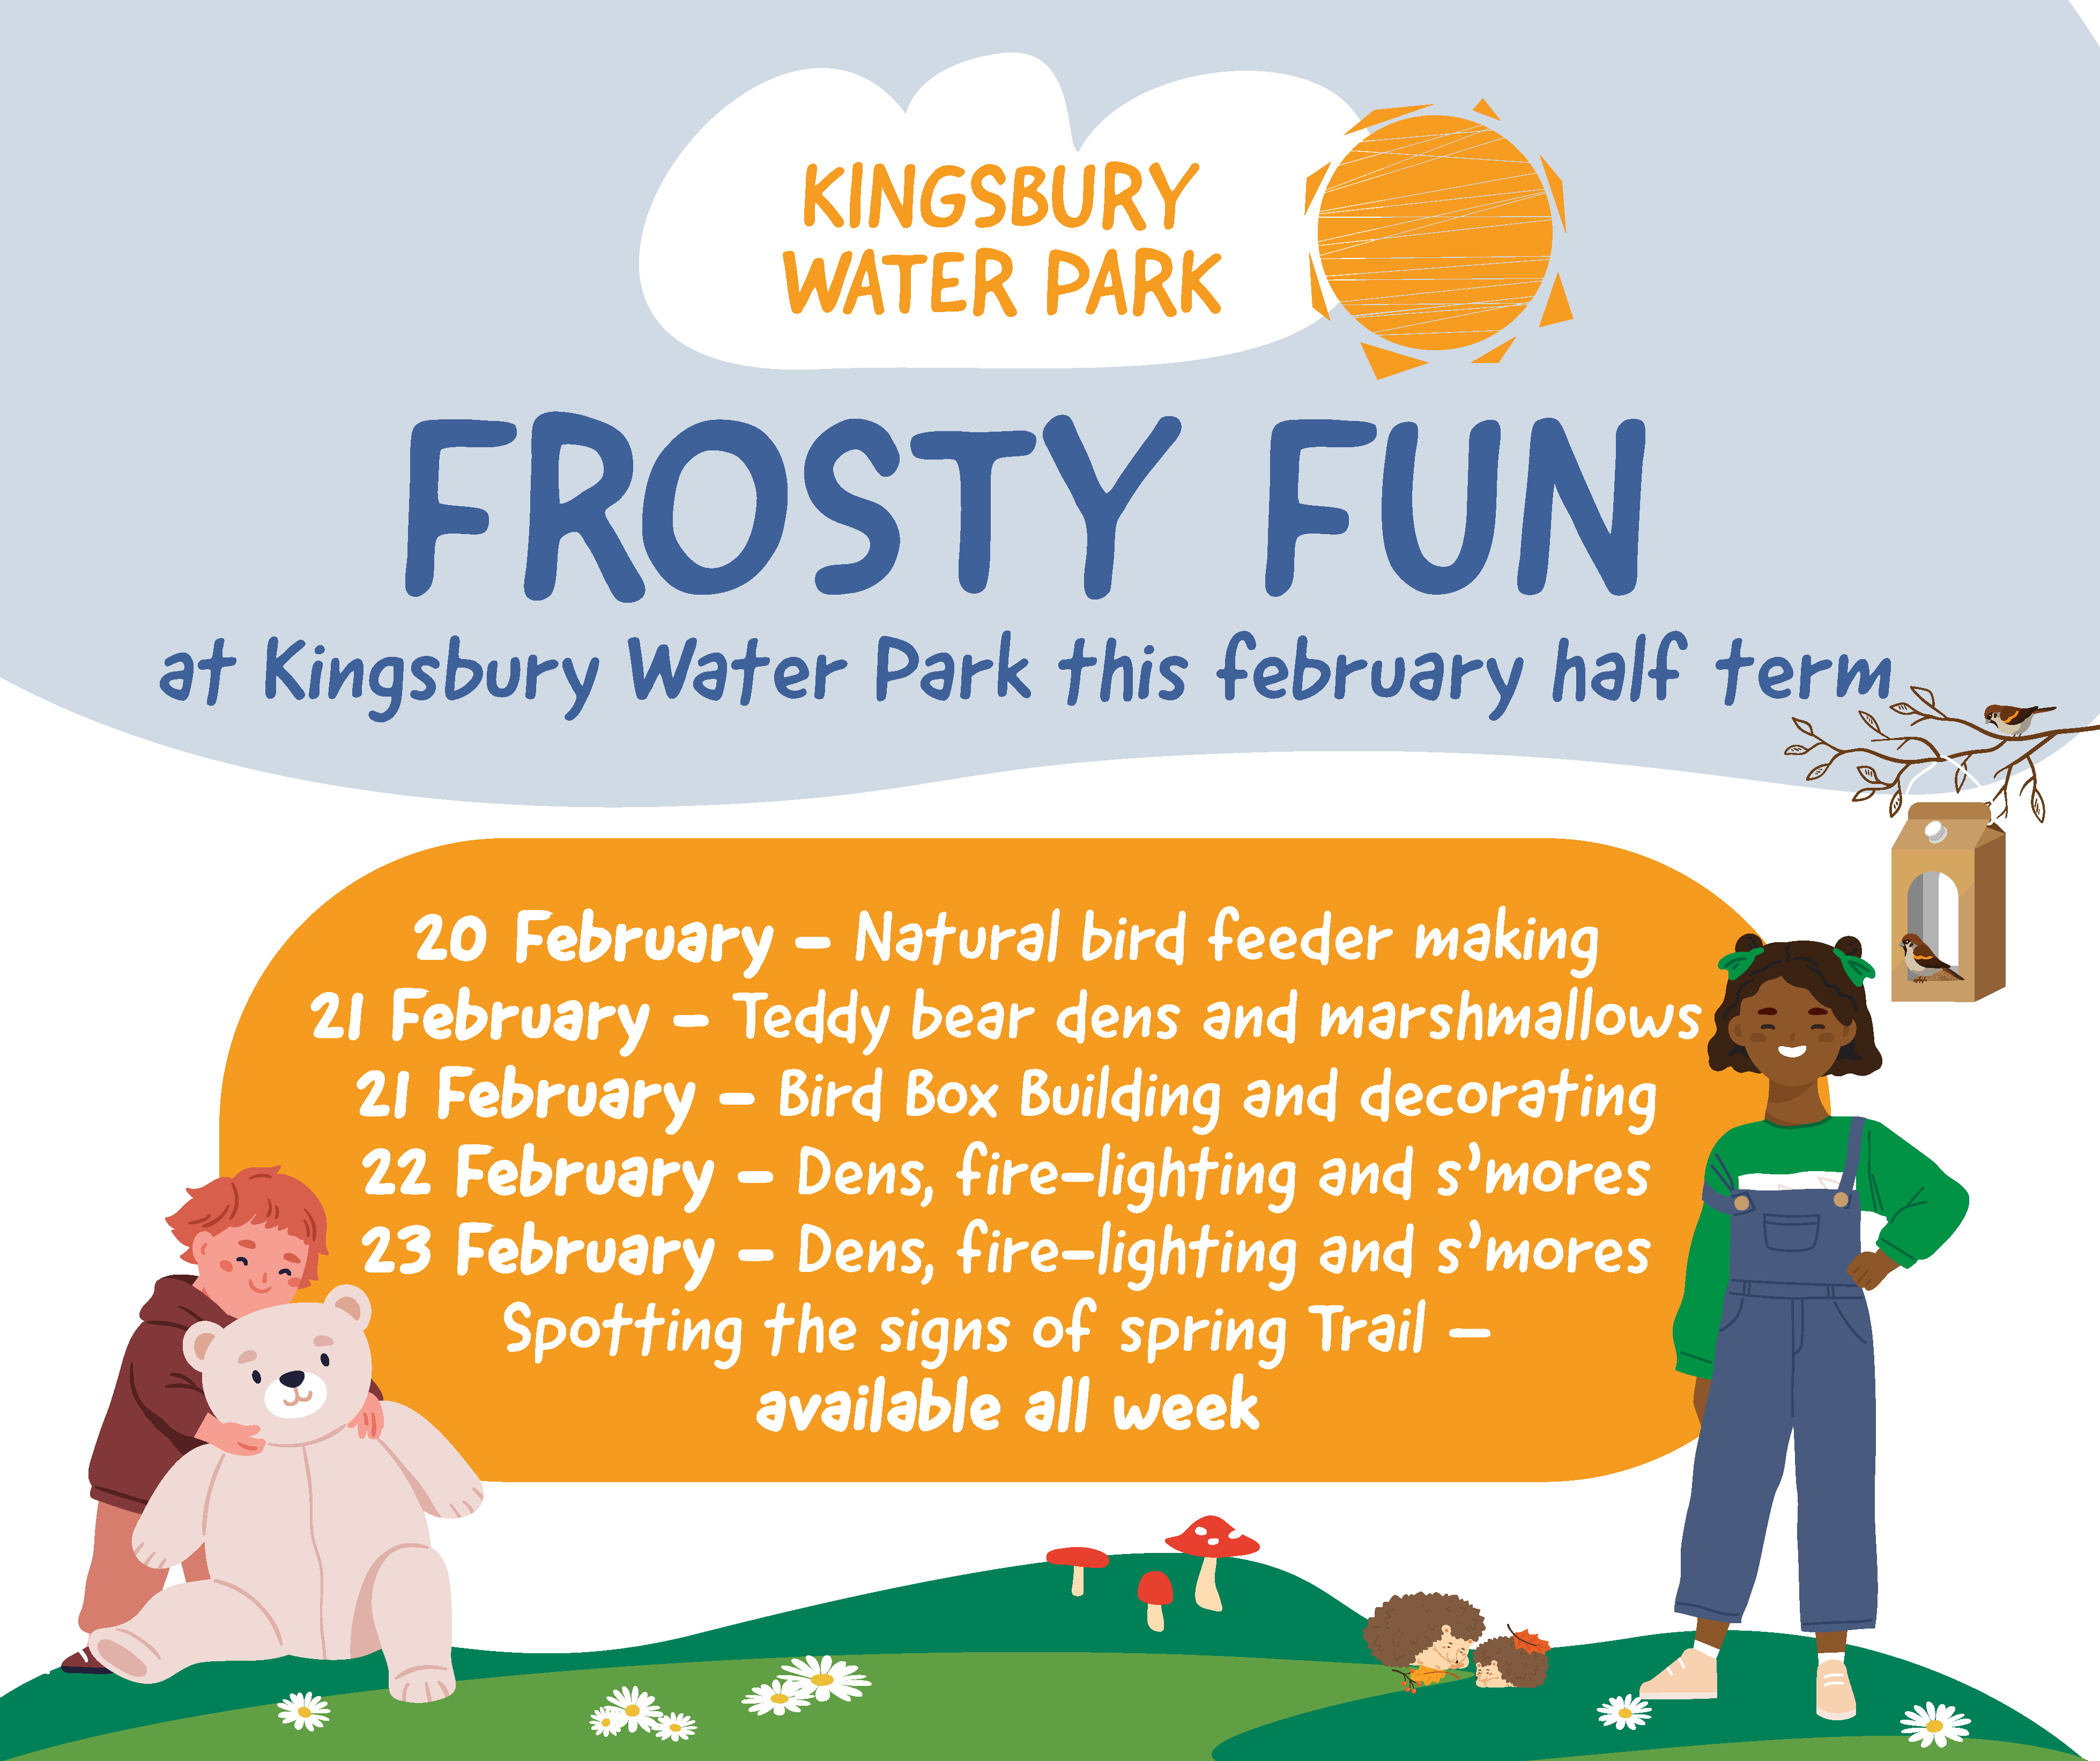 Frosty Fun at Kingsbury Water Park.